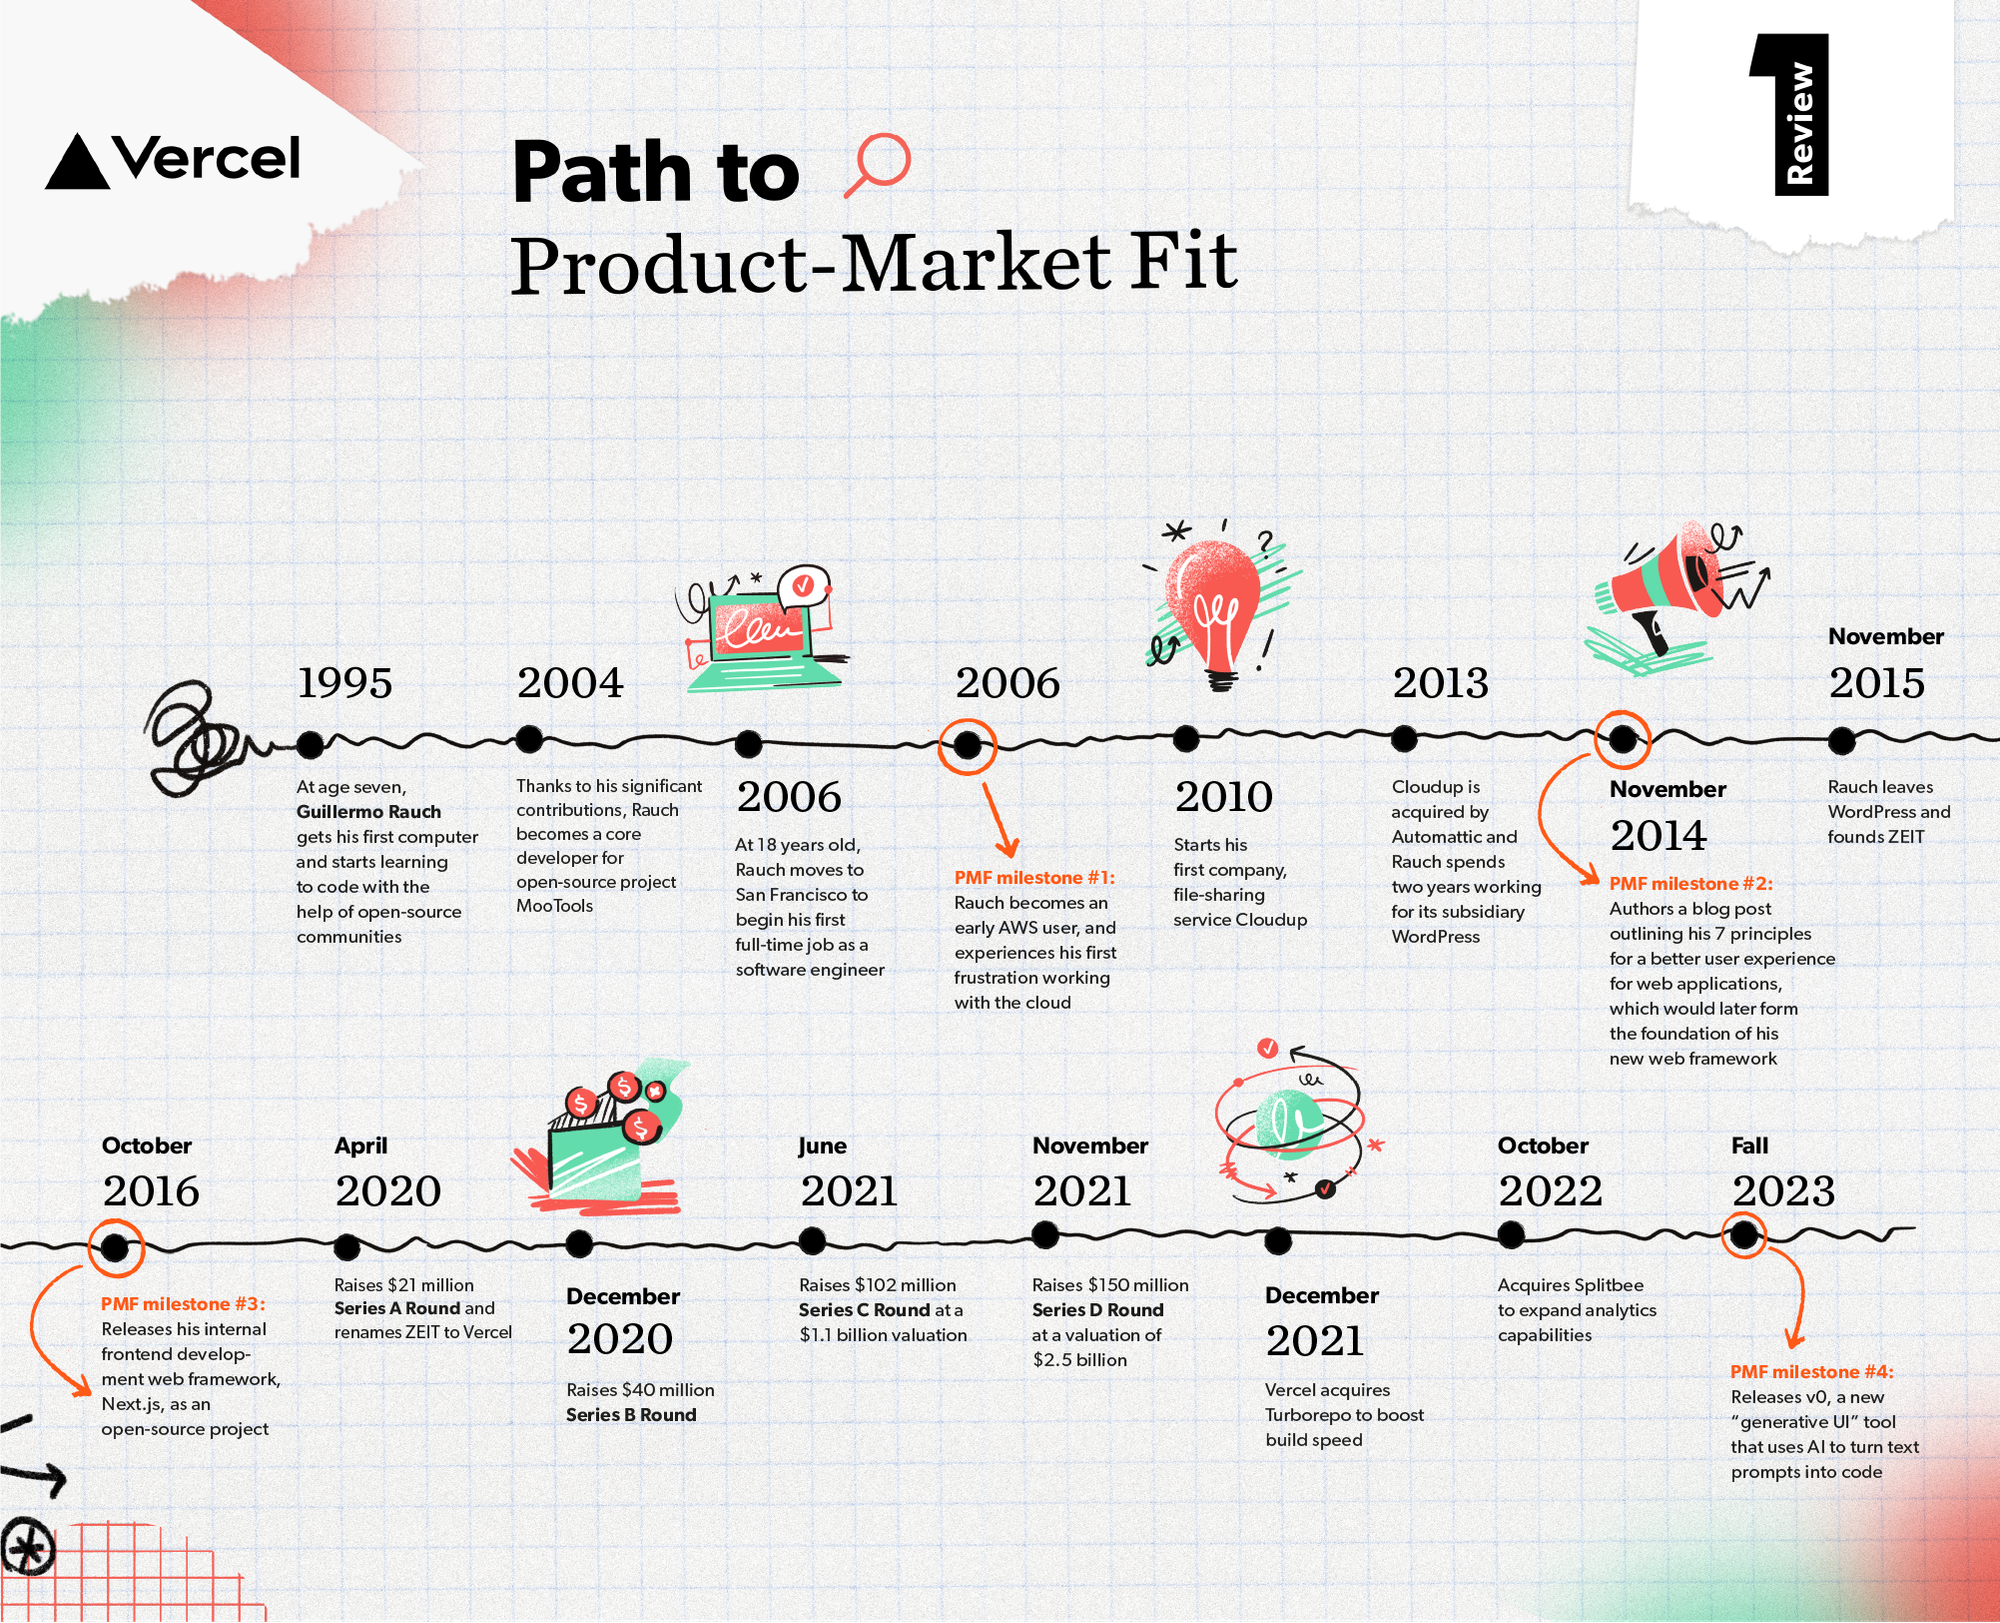 Vercel’s Path to Product-Market Fit — From Open-Source Project to Billion-Dollar Business